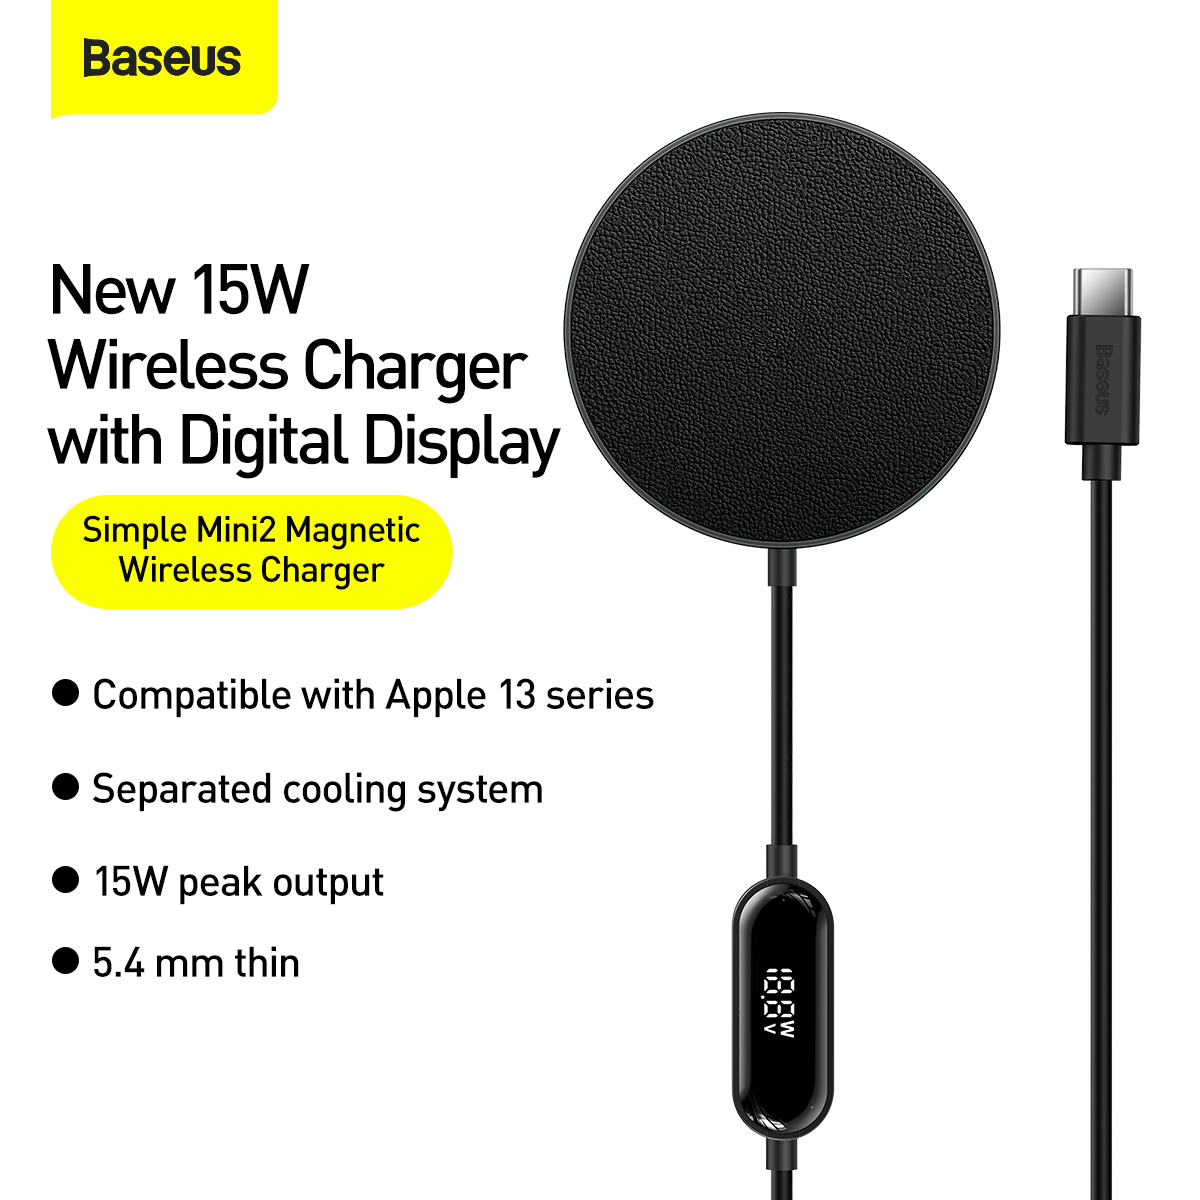 Baseus-Mini2-Magnetic-15W-Wireless-Charger-Fast-Wireless-Charging-Pad-For-Qi-enabled-Smart-Phones-fo-1917041-2